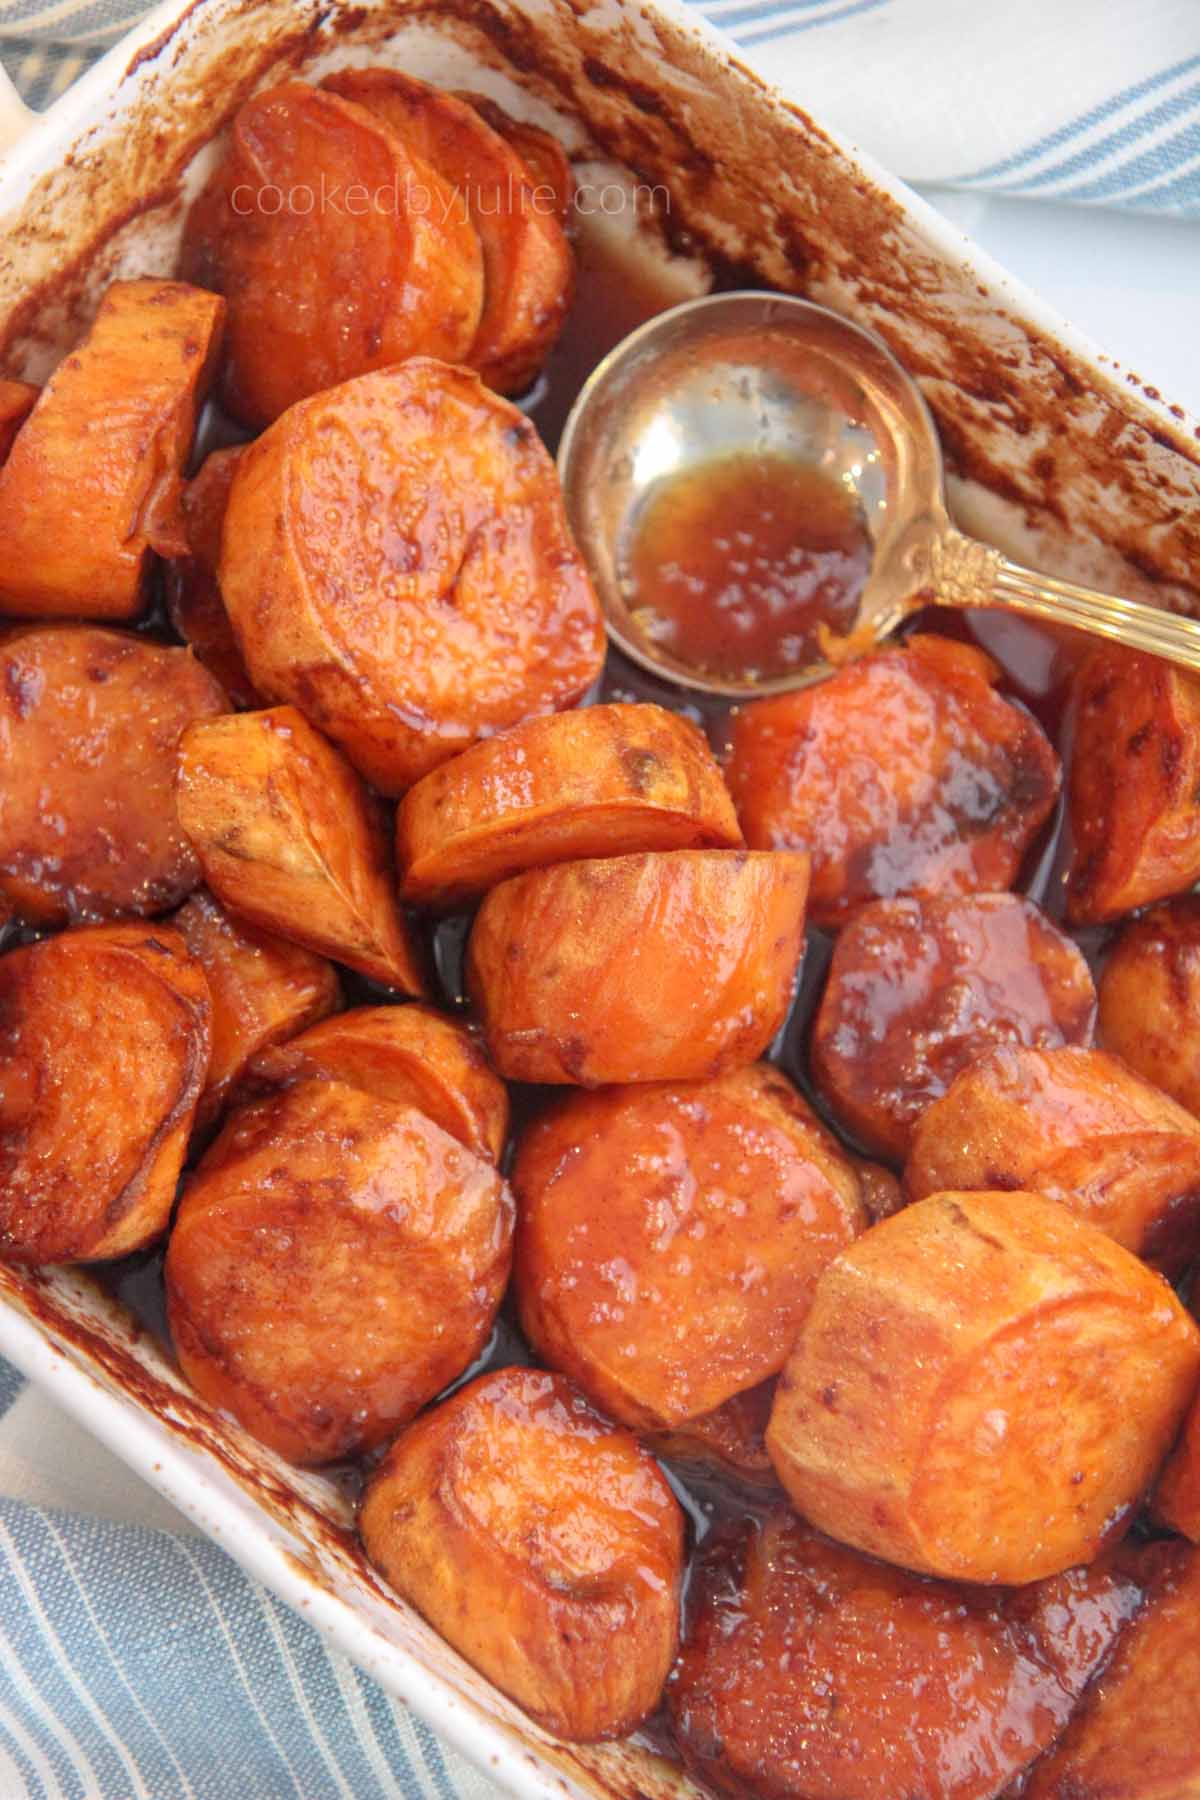 candied yams in a casserole dish with a spoon.